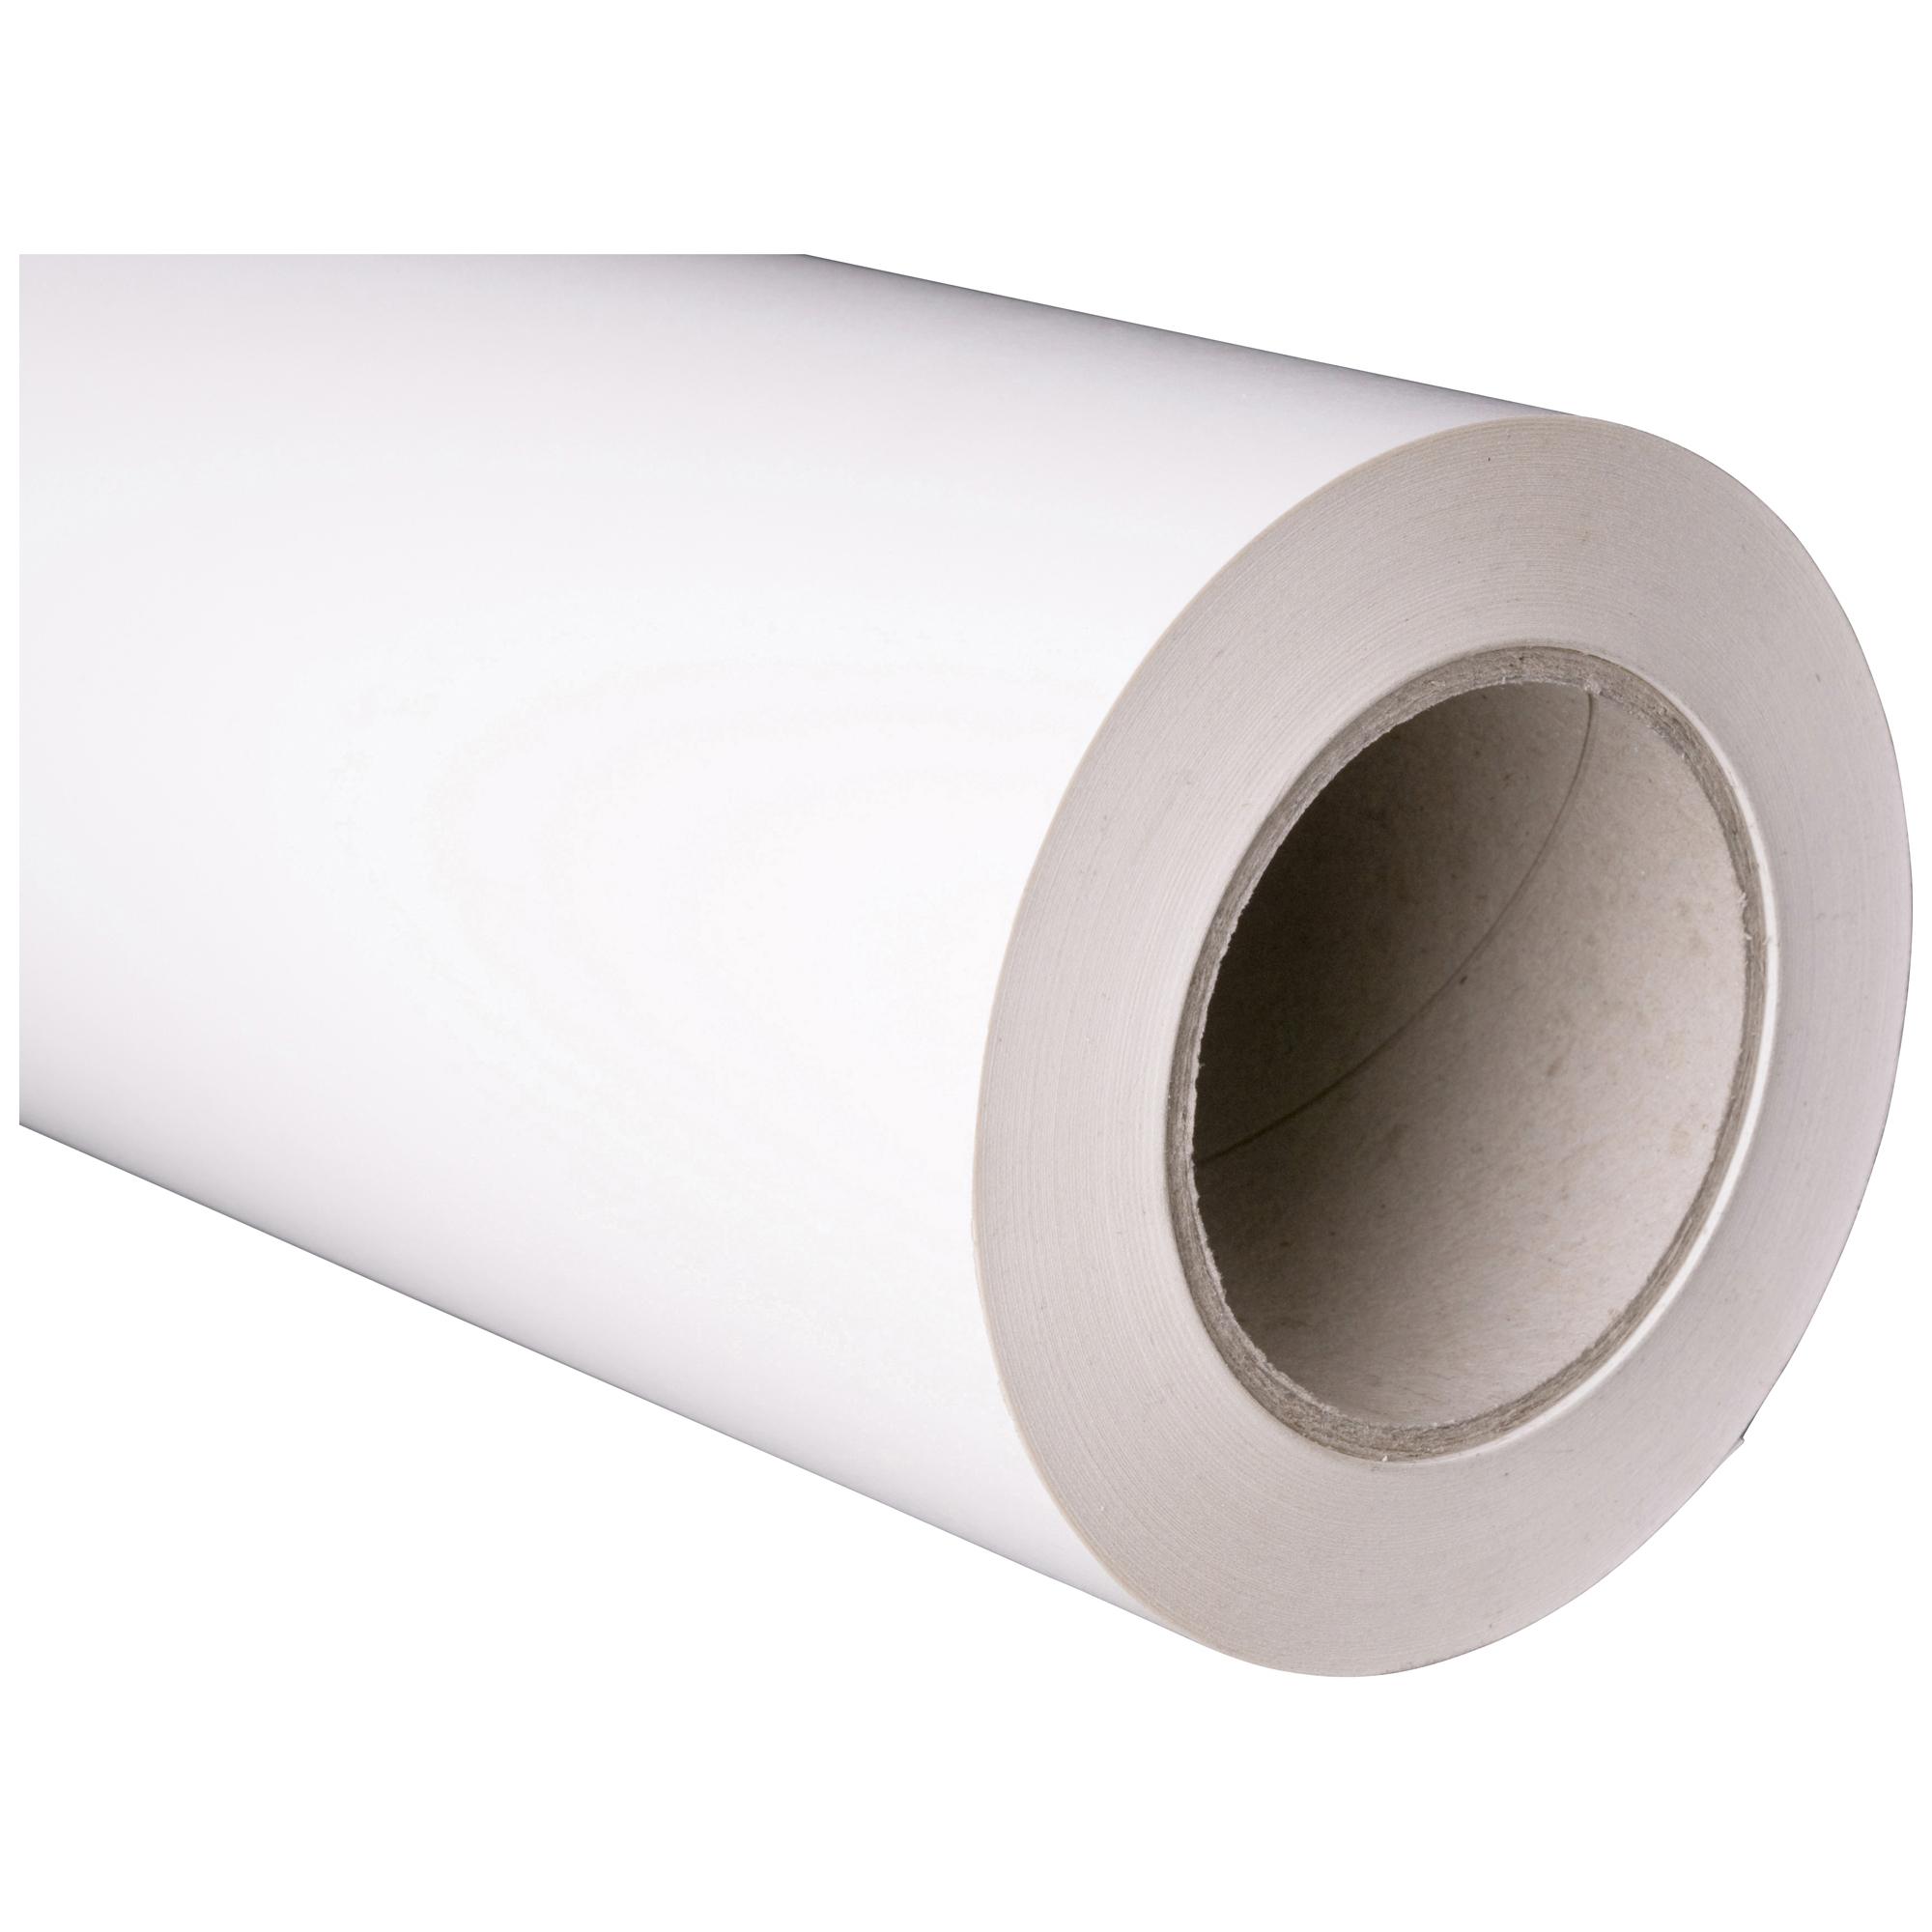 Cold Mounting Film for rough surfaces, Pressure Sensitive Film